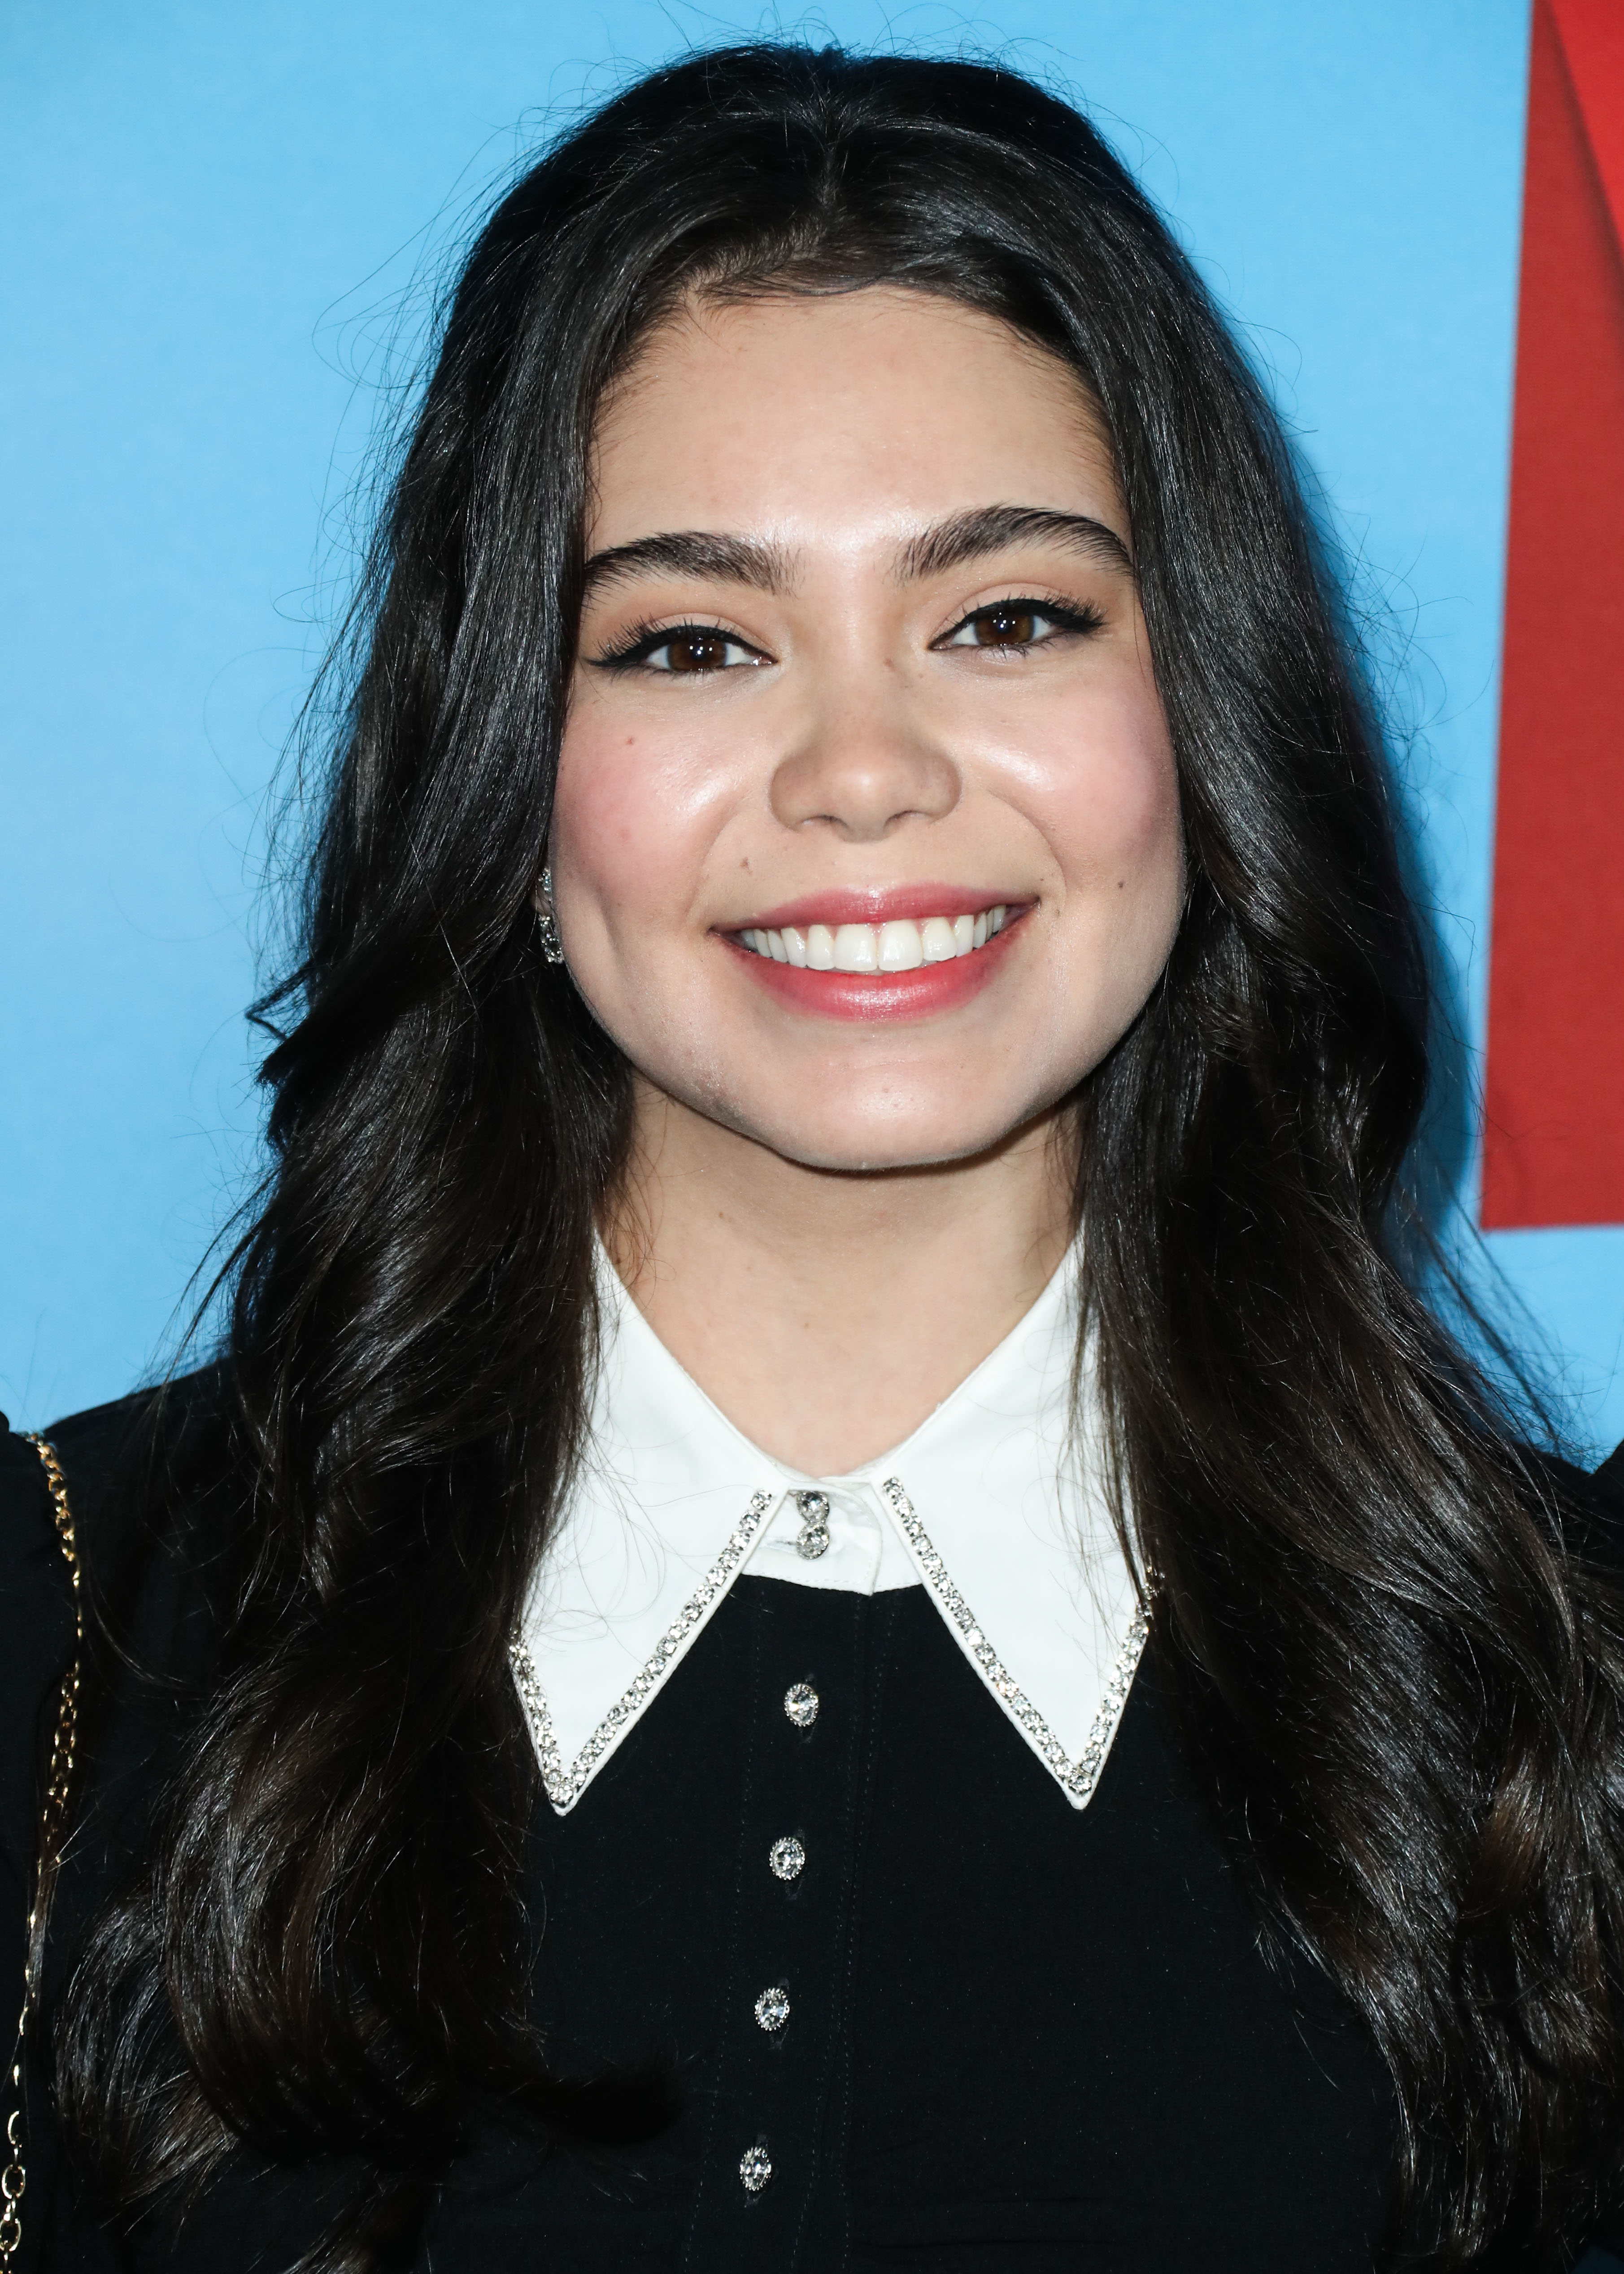 Auli'i Cravalho's Projects After Starring as 'Moana': Details